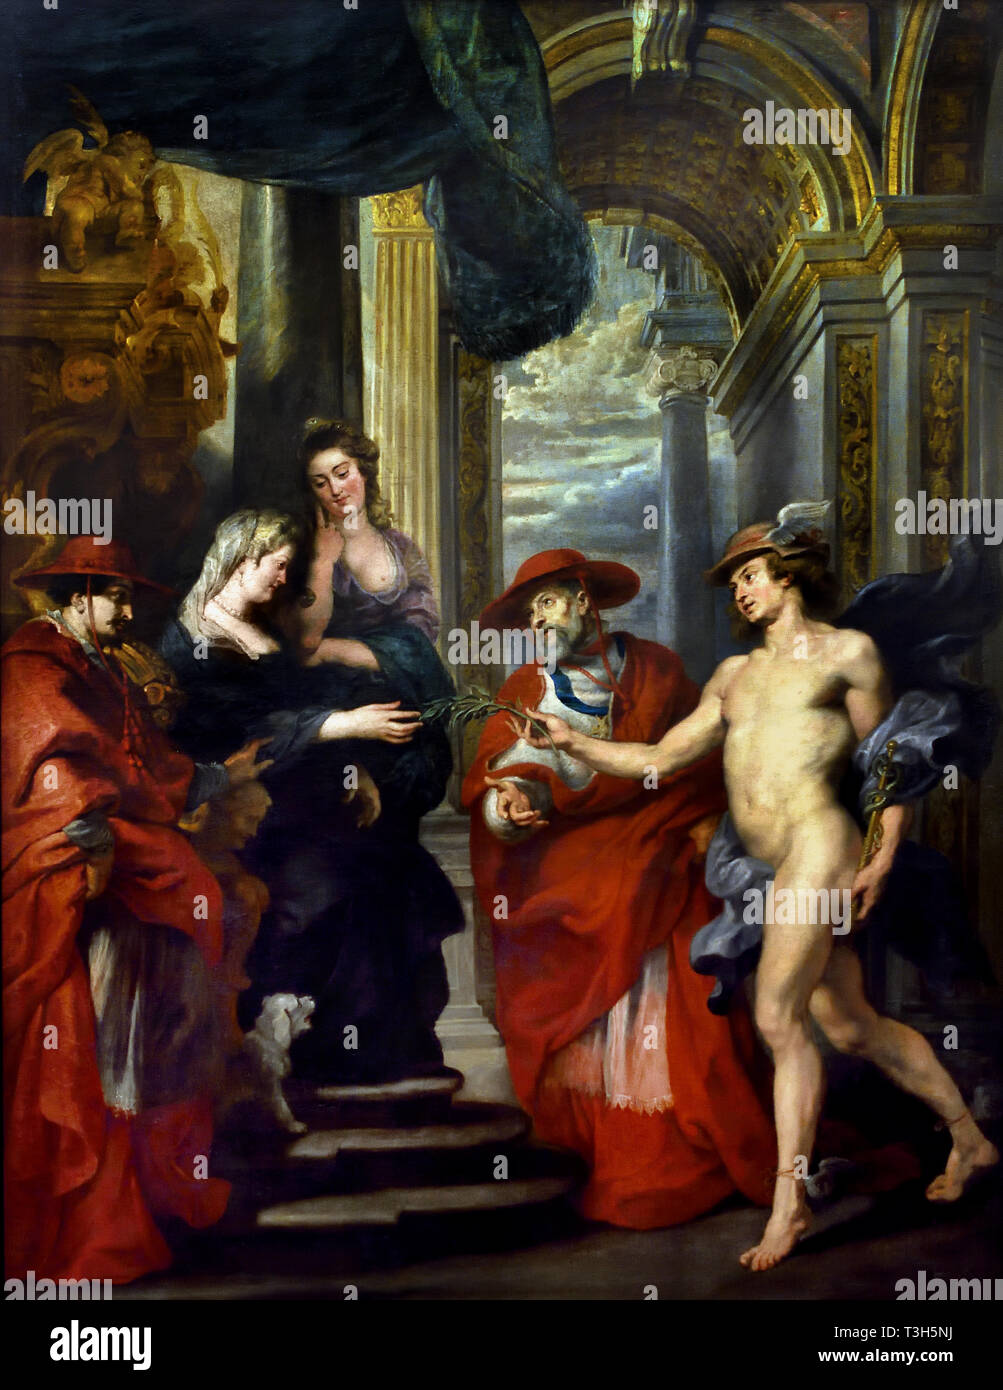 The Negotiations at Angoulême, Marie de' Medici genially takes the olive branch from Mercury, the messenger god - The Marie de' Medici Cycle 1622-1624  by Peter Paul Rubens commissioned by Queen Marie de' Medici, widow of King Henry IV of France, for the Luxembourg Palace in Paris, Stock Photo